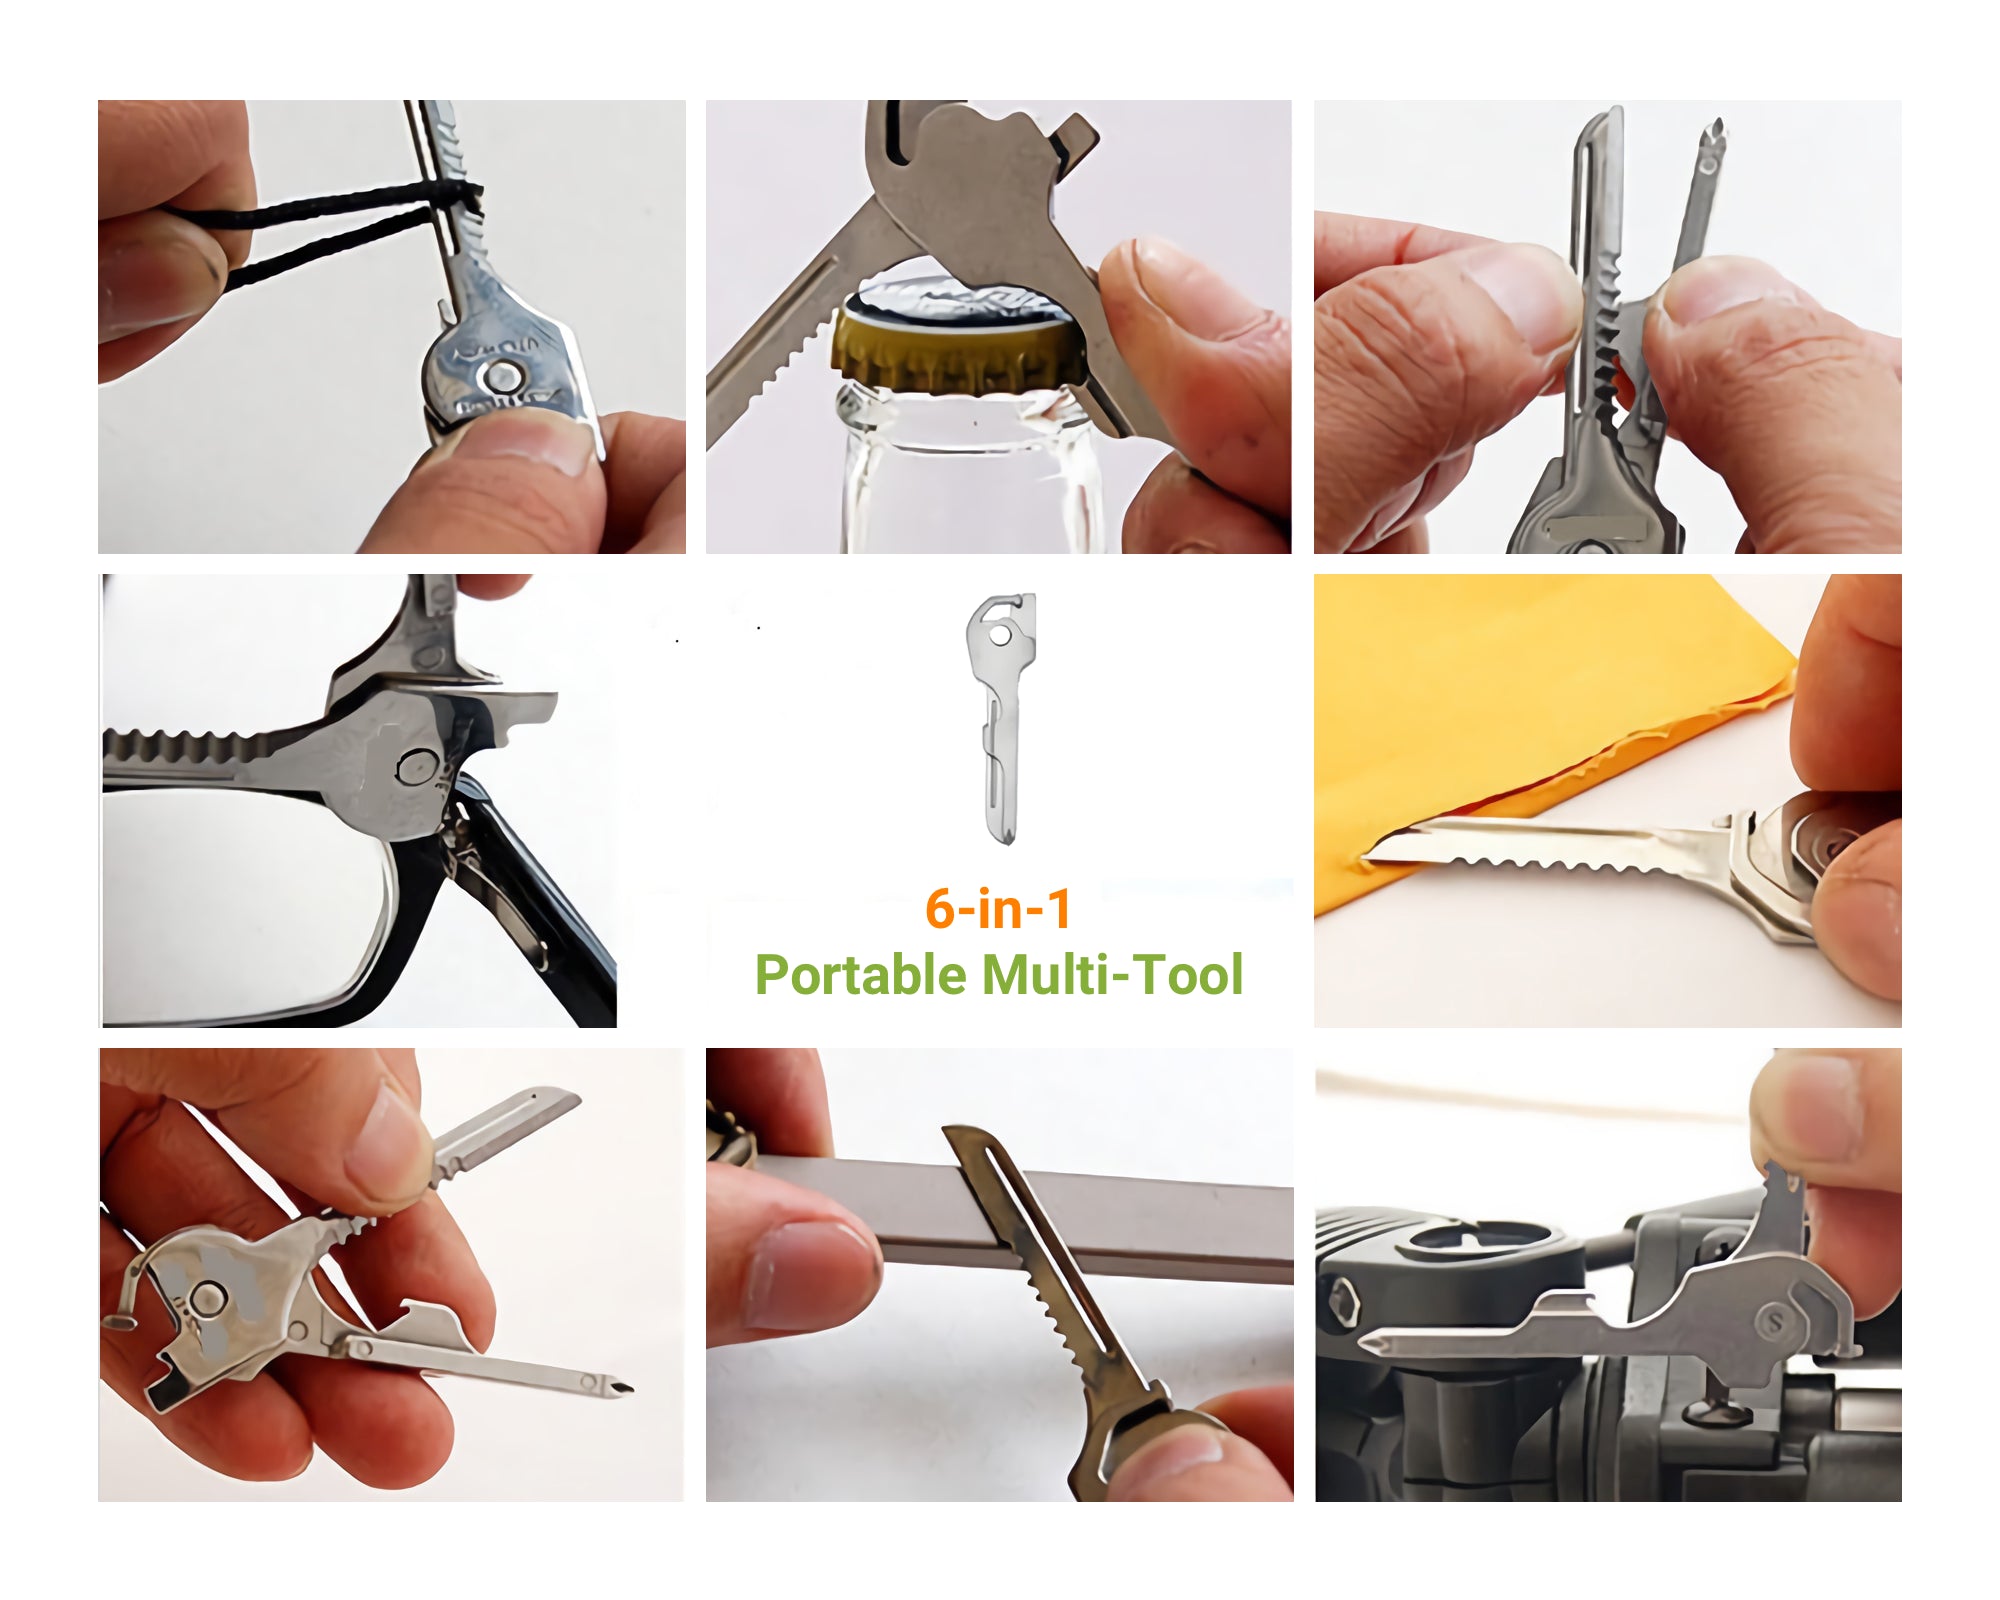 6 most commonly used tools are integrated into it. The straight knife blade is built sharp and durable for unpacking parcels or envelopes. The micro eyeglass screwdriver helps you fix minor problems with your glasses. The serrated knife blade is designed to cut threads off.